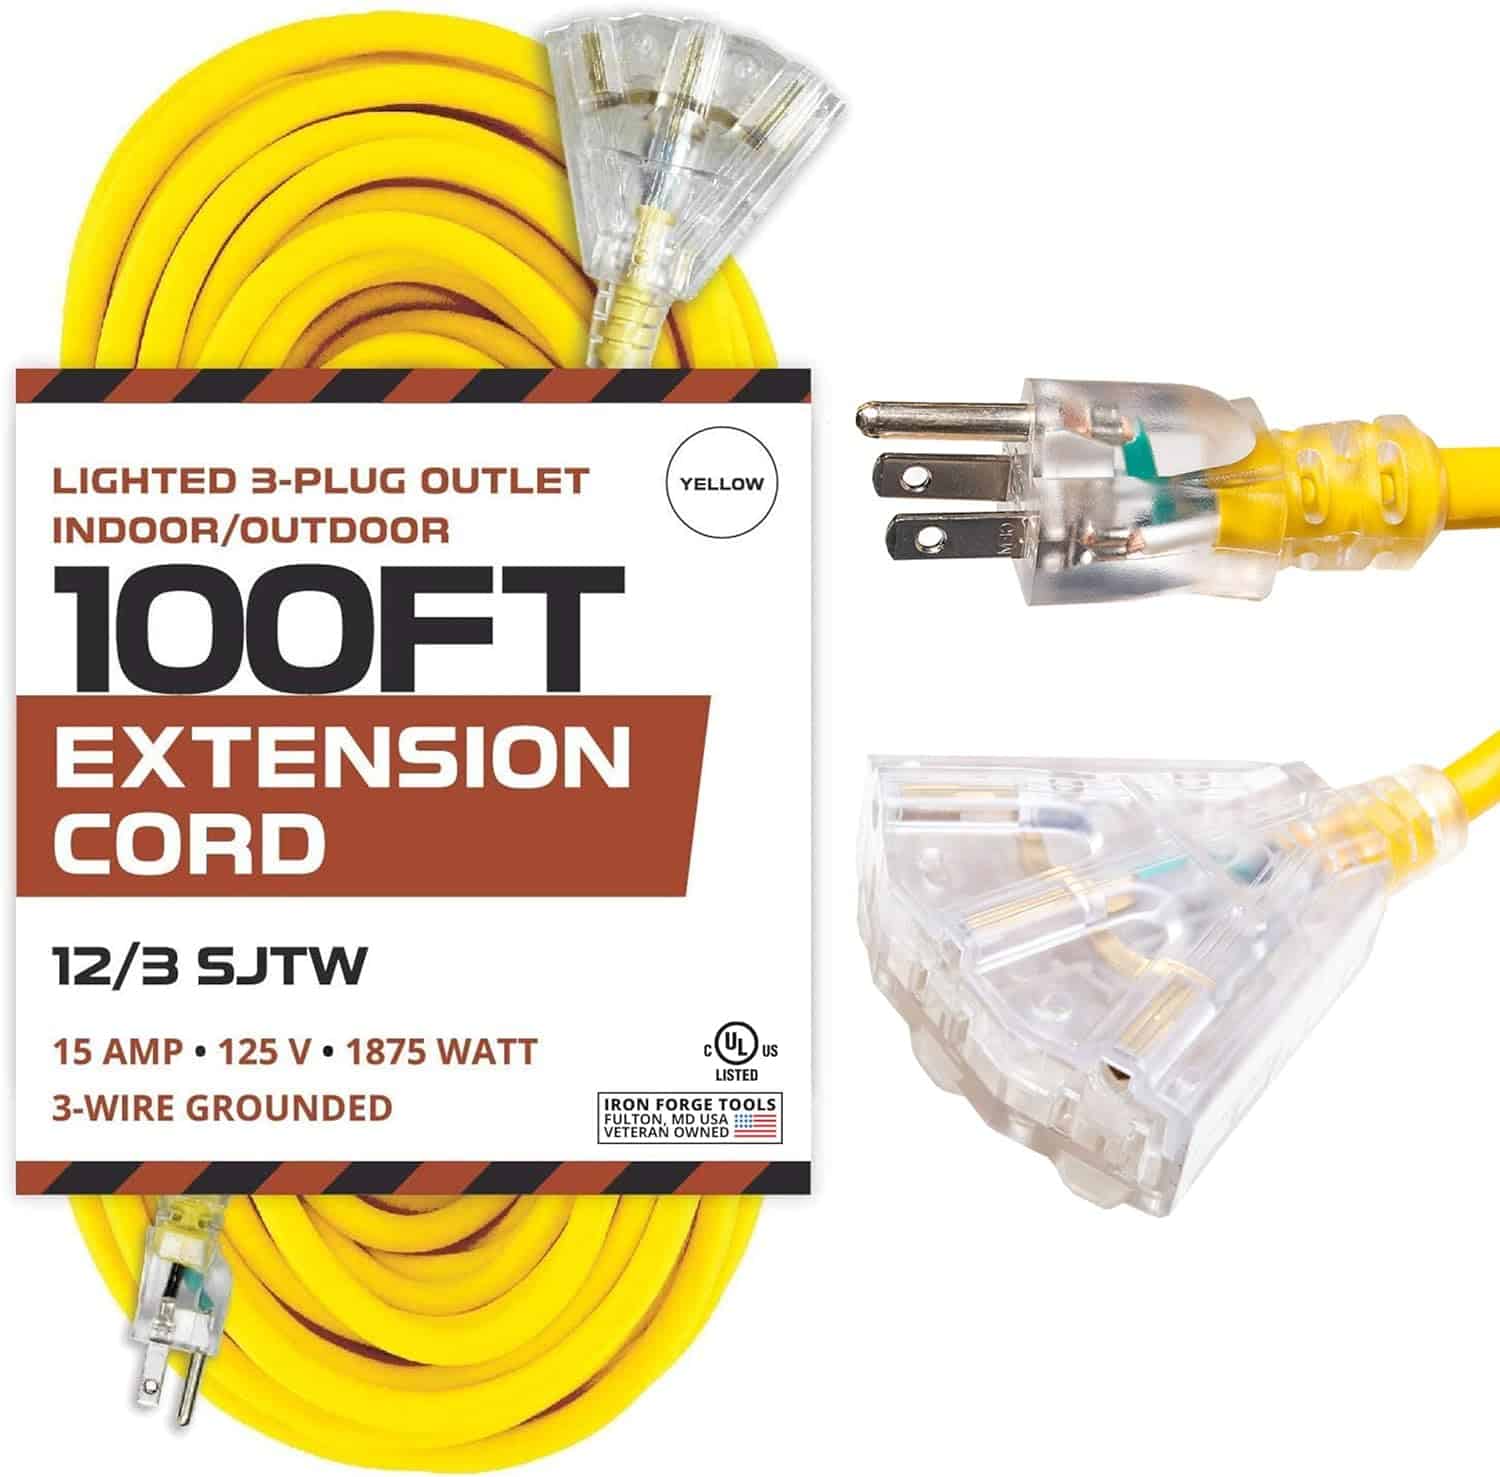 Iron Forge Cable 100ft Outdoor Extension Cord, Lighted with 3 Electrical Power Outlets – 12 3 Gauge SJTW Heavy Duty Extension Cable, Yellow, 15 AMP – 3 Pronged with Grounded Plug for Improved Safety 1